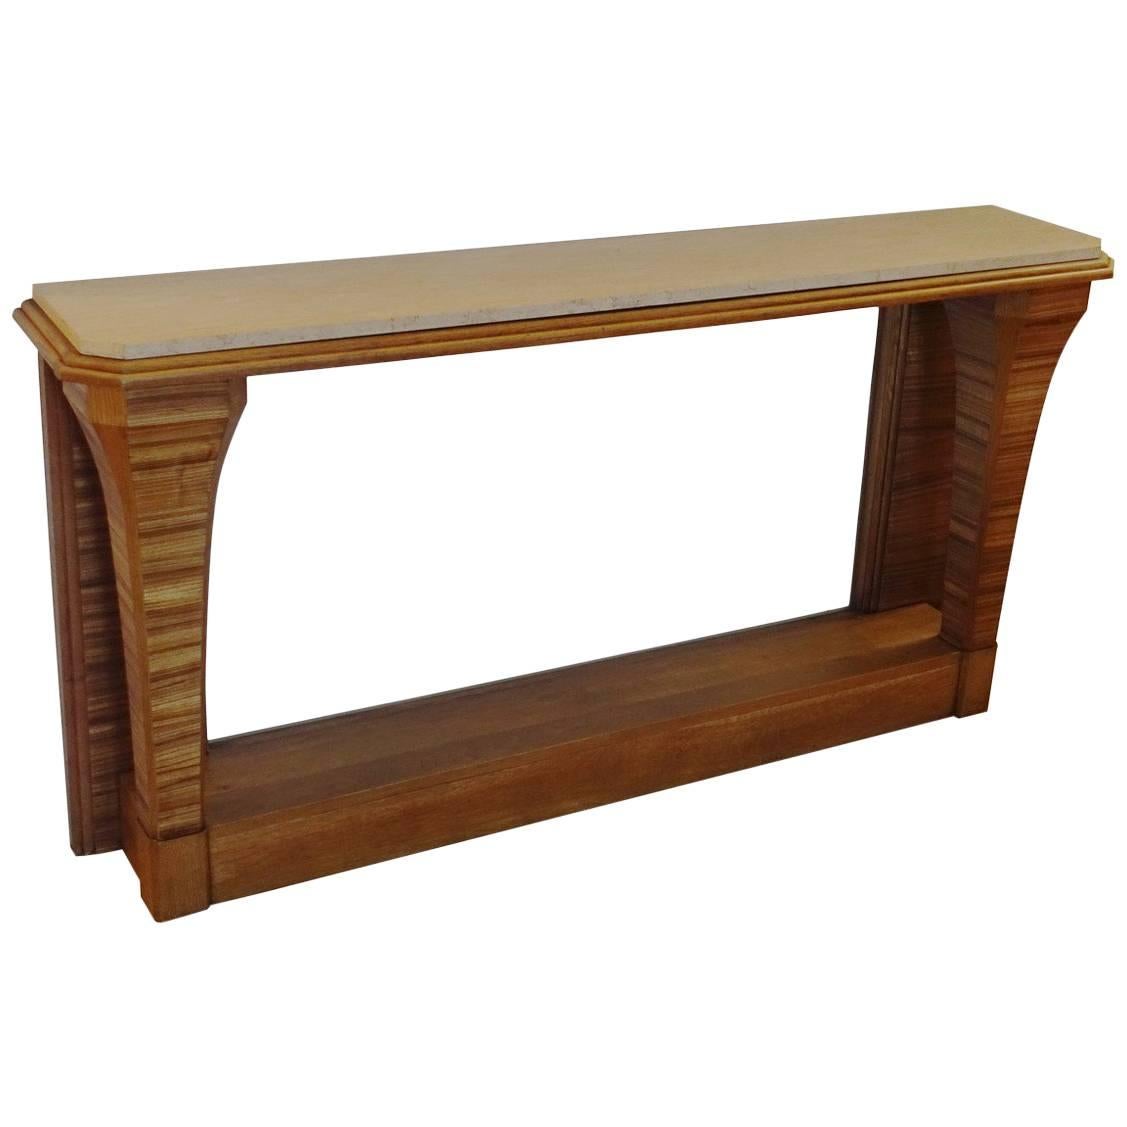 Zebrano Wood Console, France, 1940s